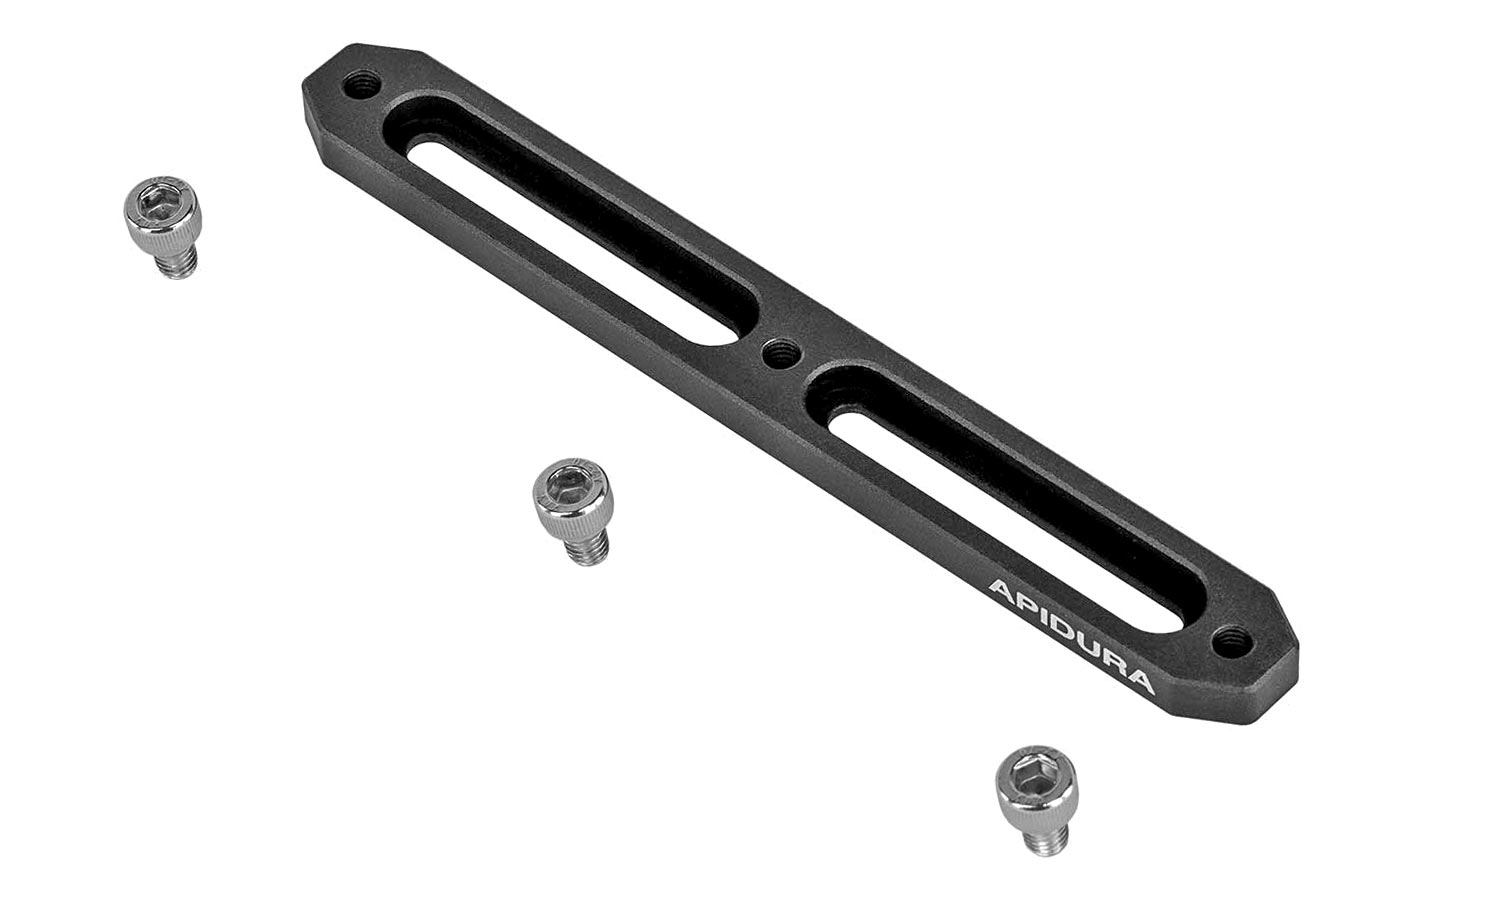 Apidura Innovation Lab Bottle Cage Adapter, 2 to 3-bolt anything cage mount, simple